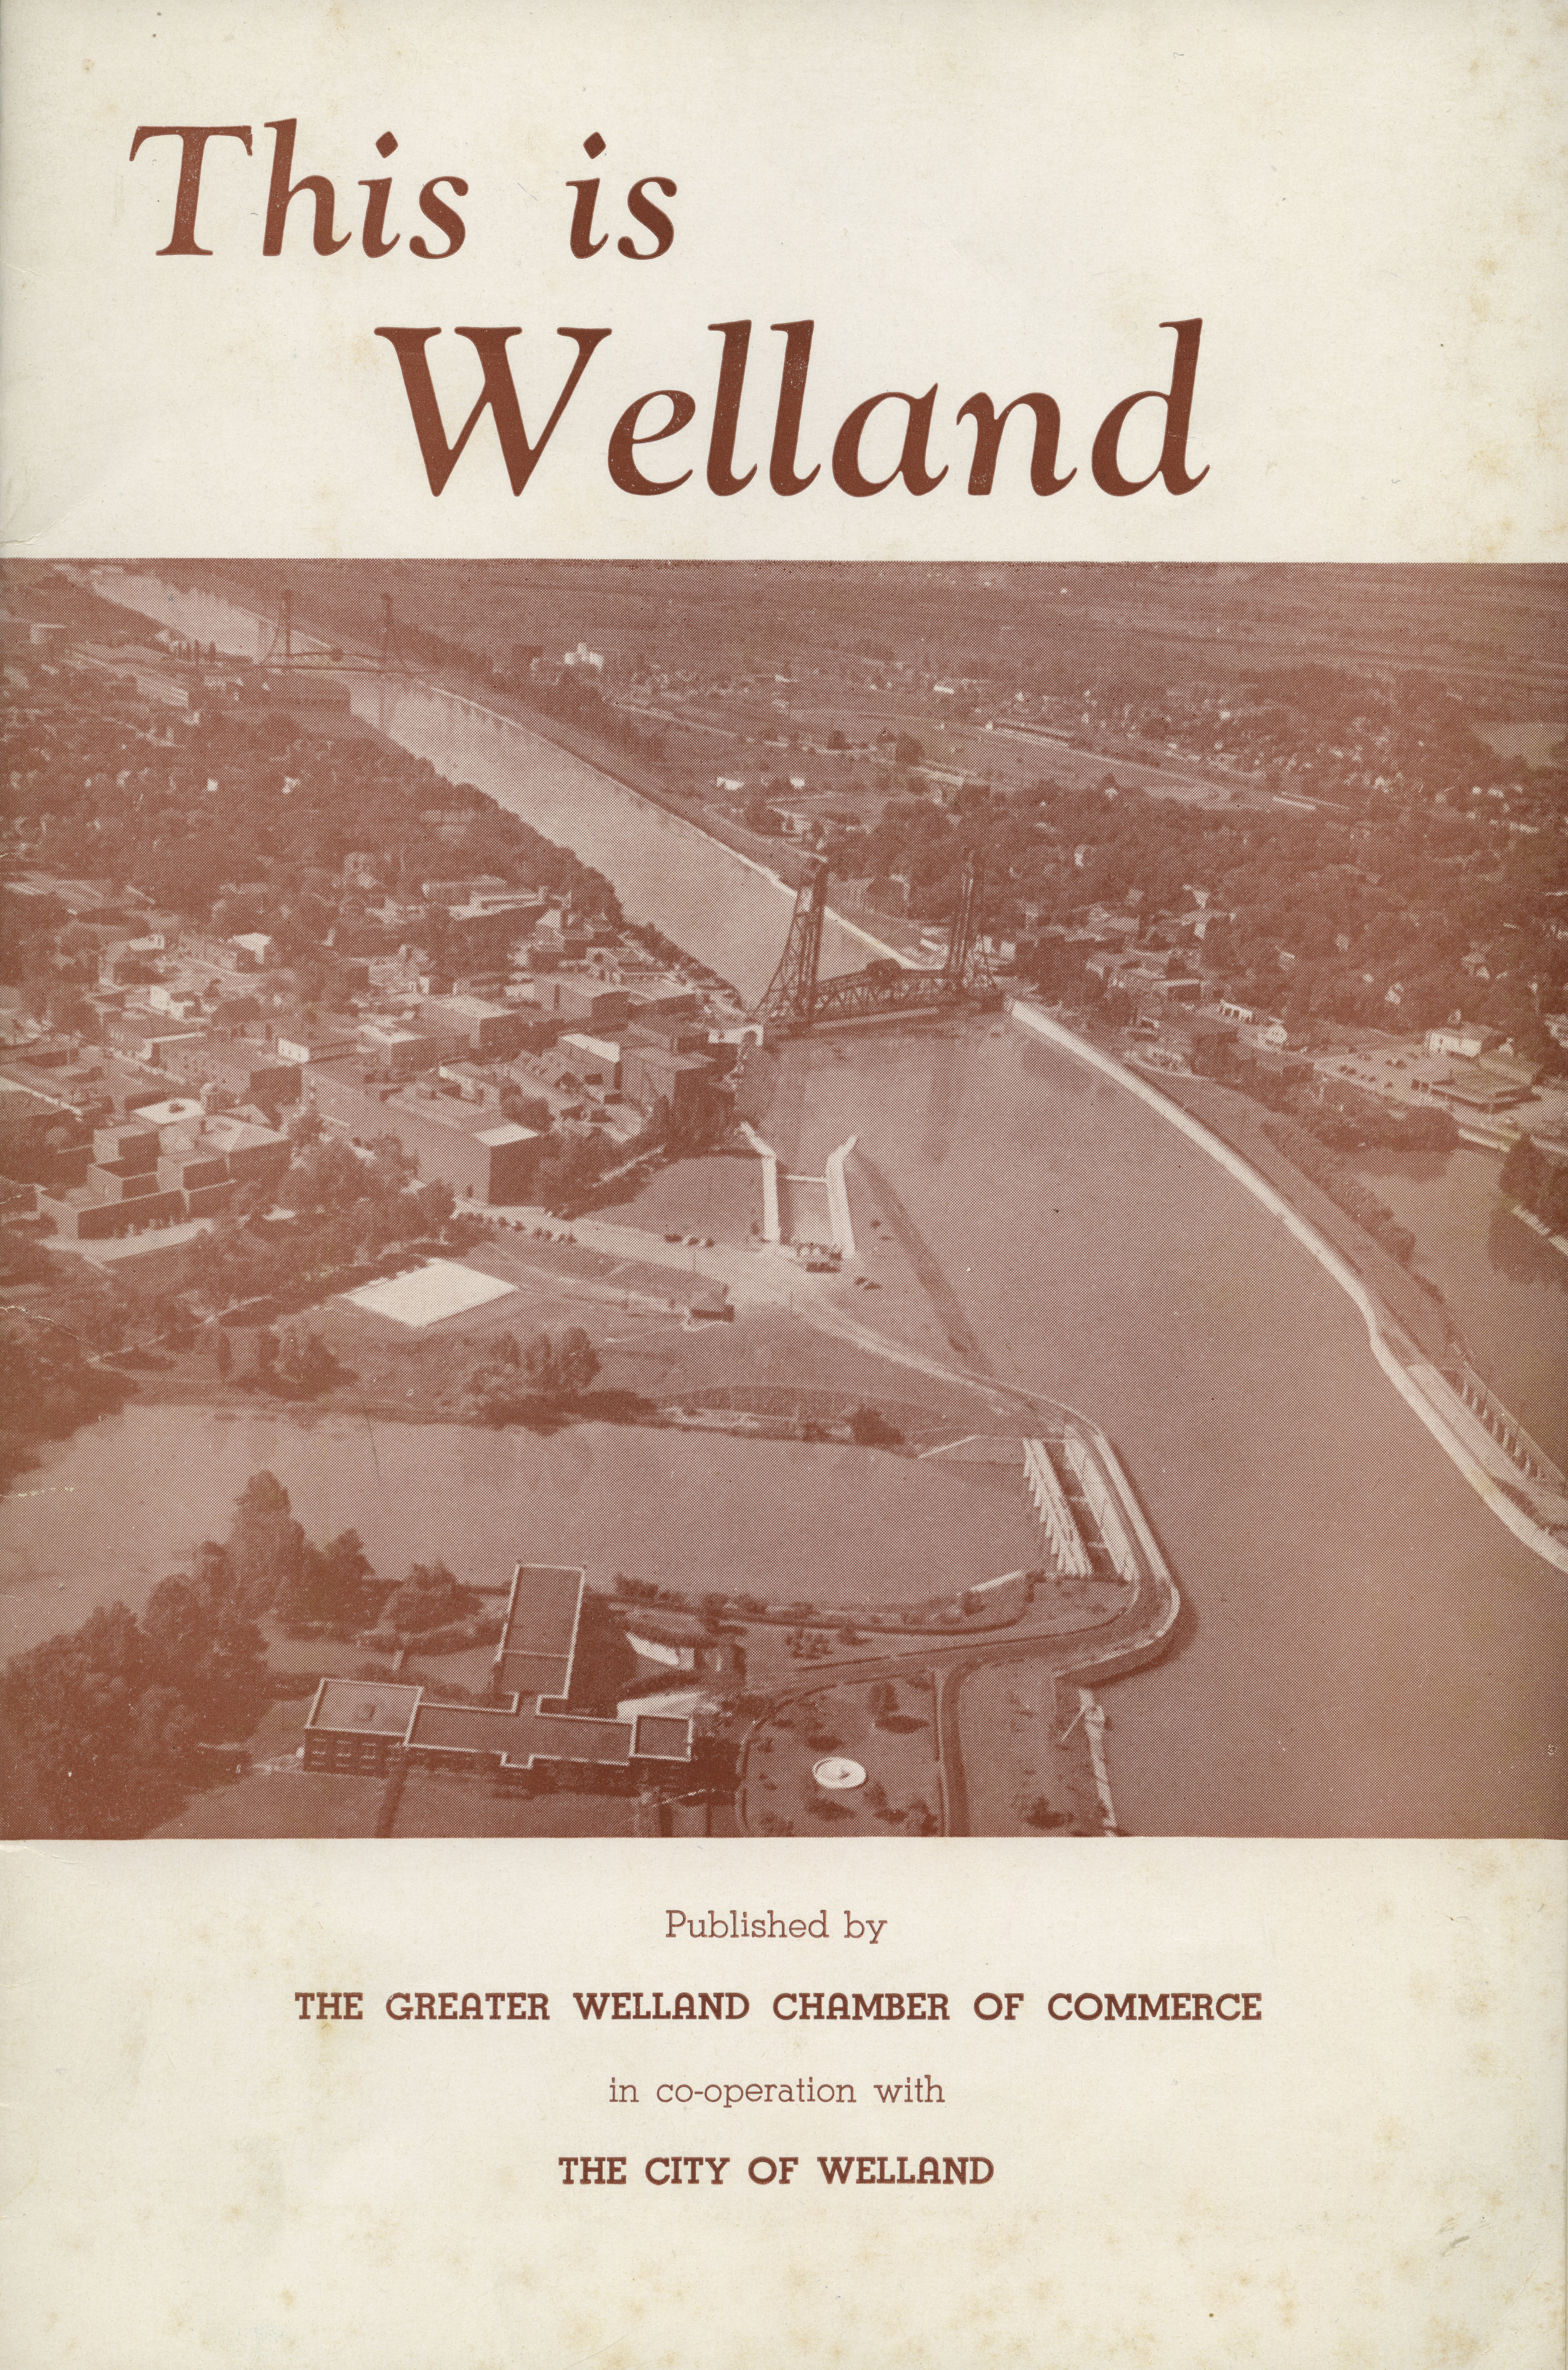 The cover page of a brochure. It reads "This is Welland" and has an aerial view of the Welland canal.